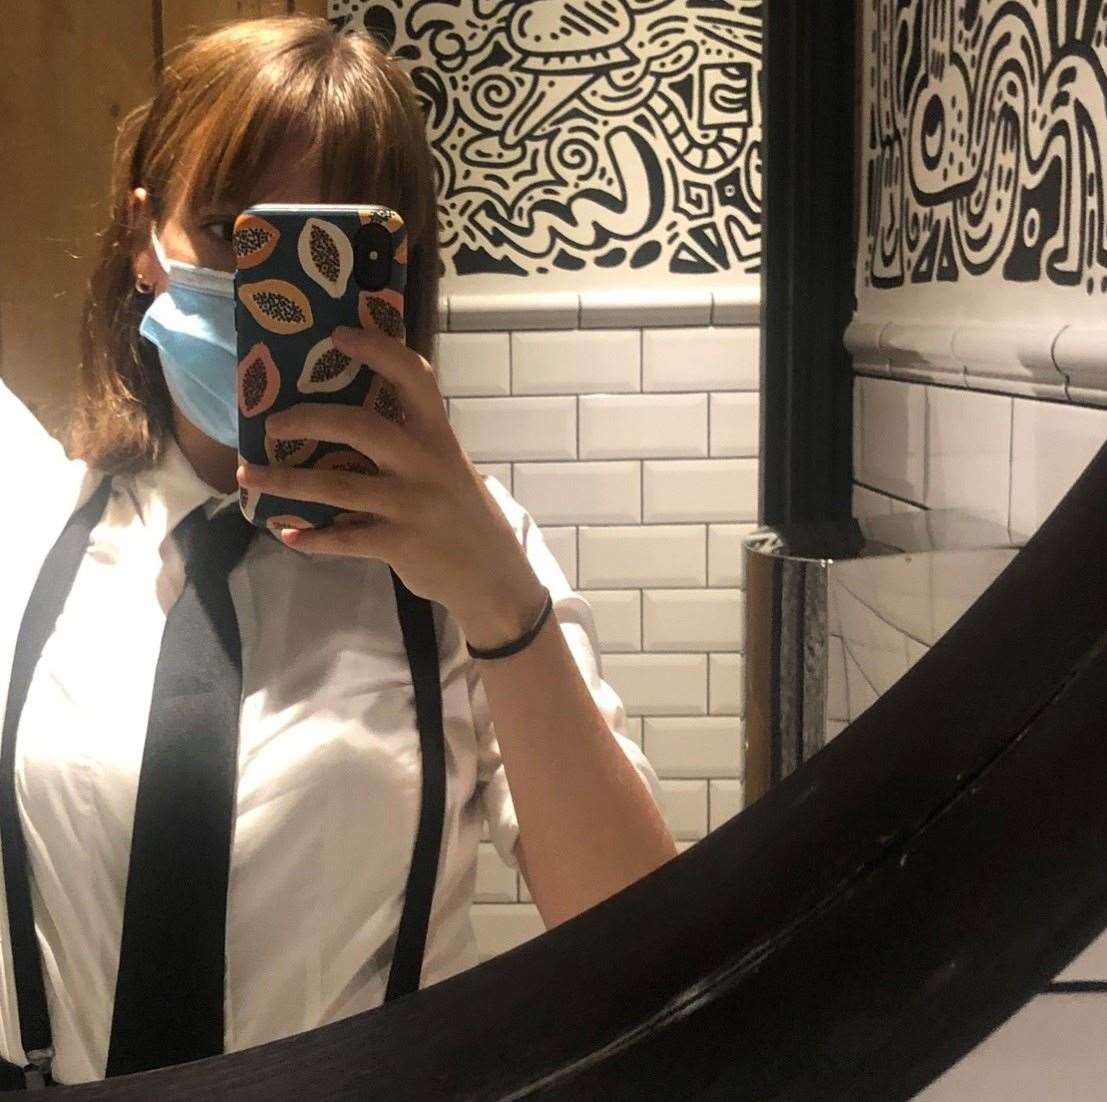 Lotte Brundle works part-time as a bartender in Canterbury